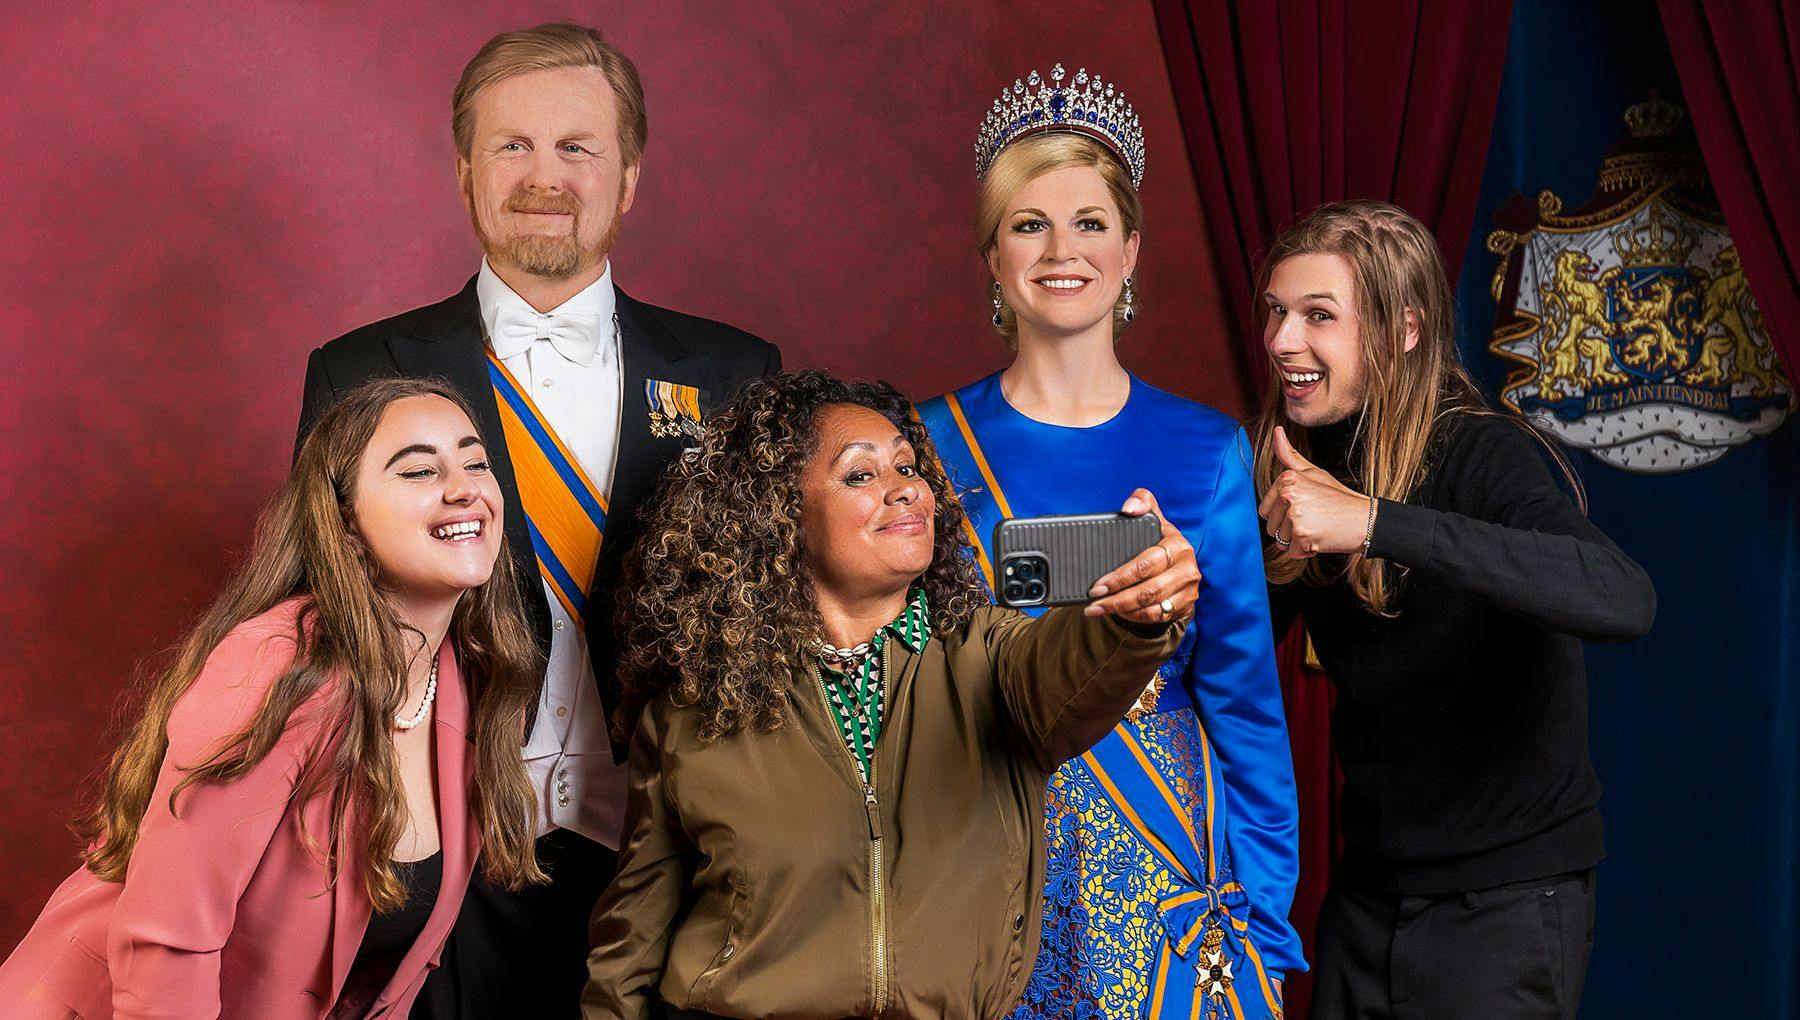 Madame Tussauds women posing with the Dutch King & Queen